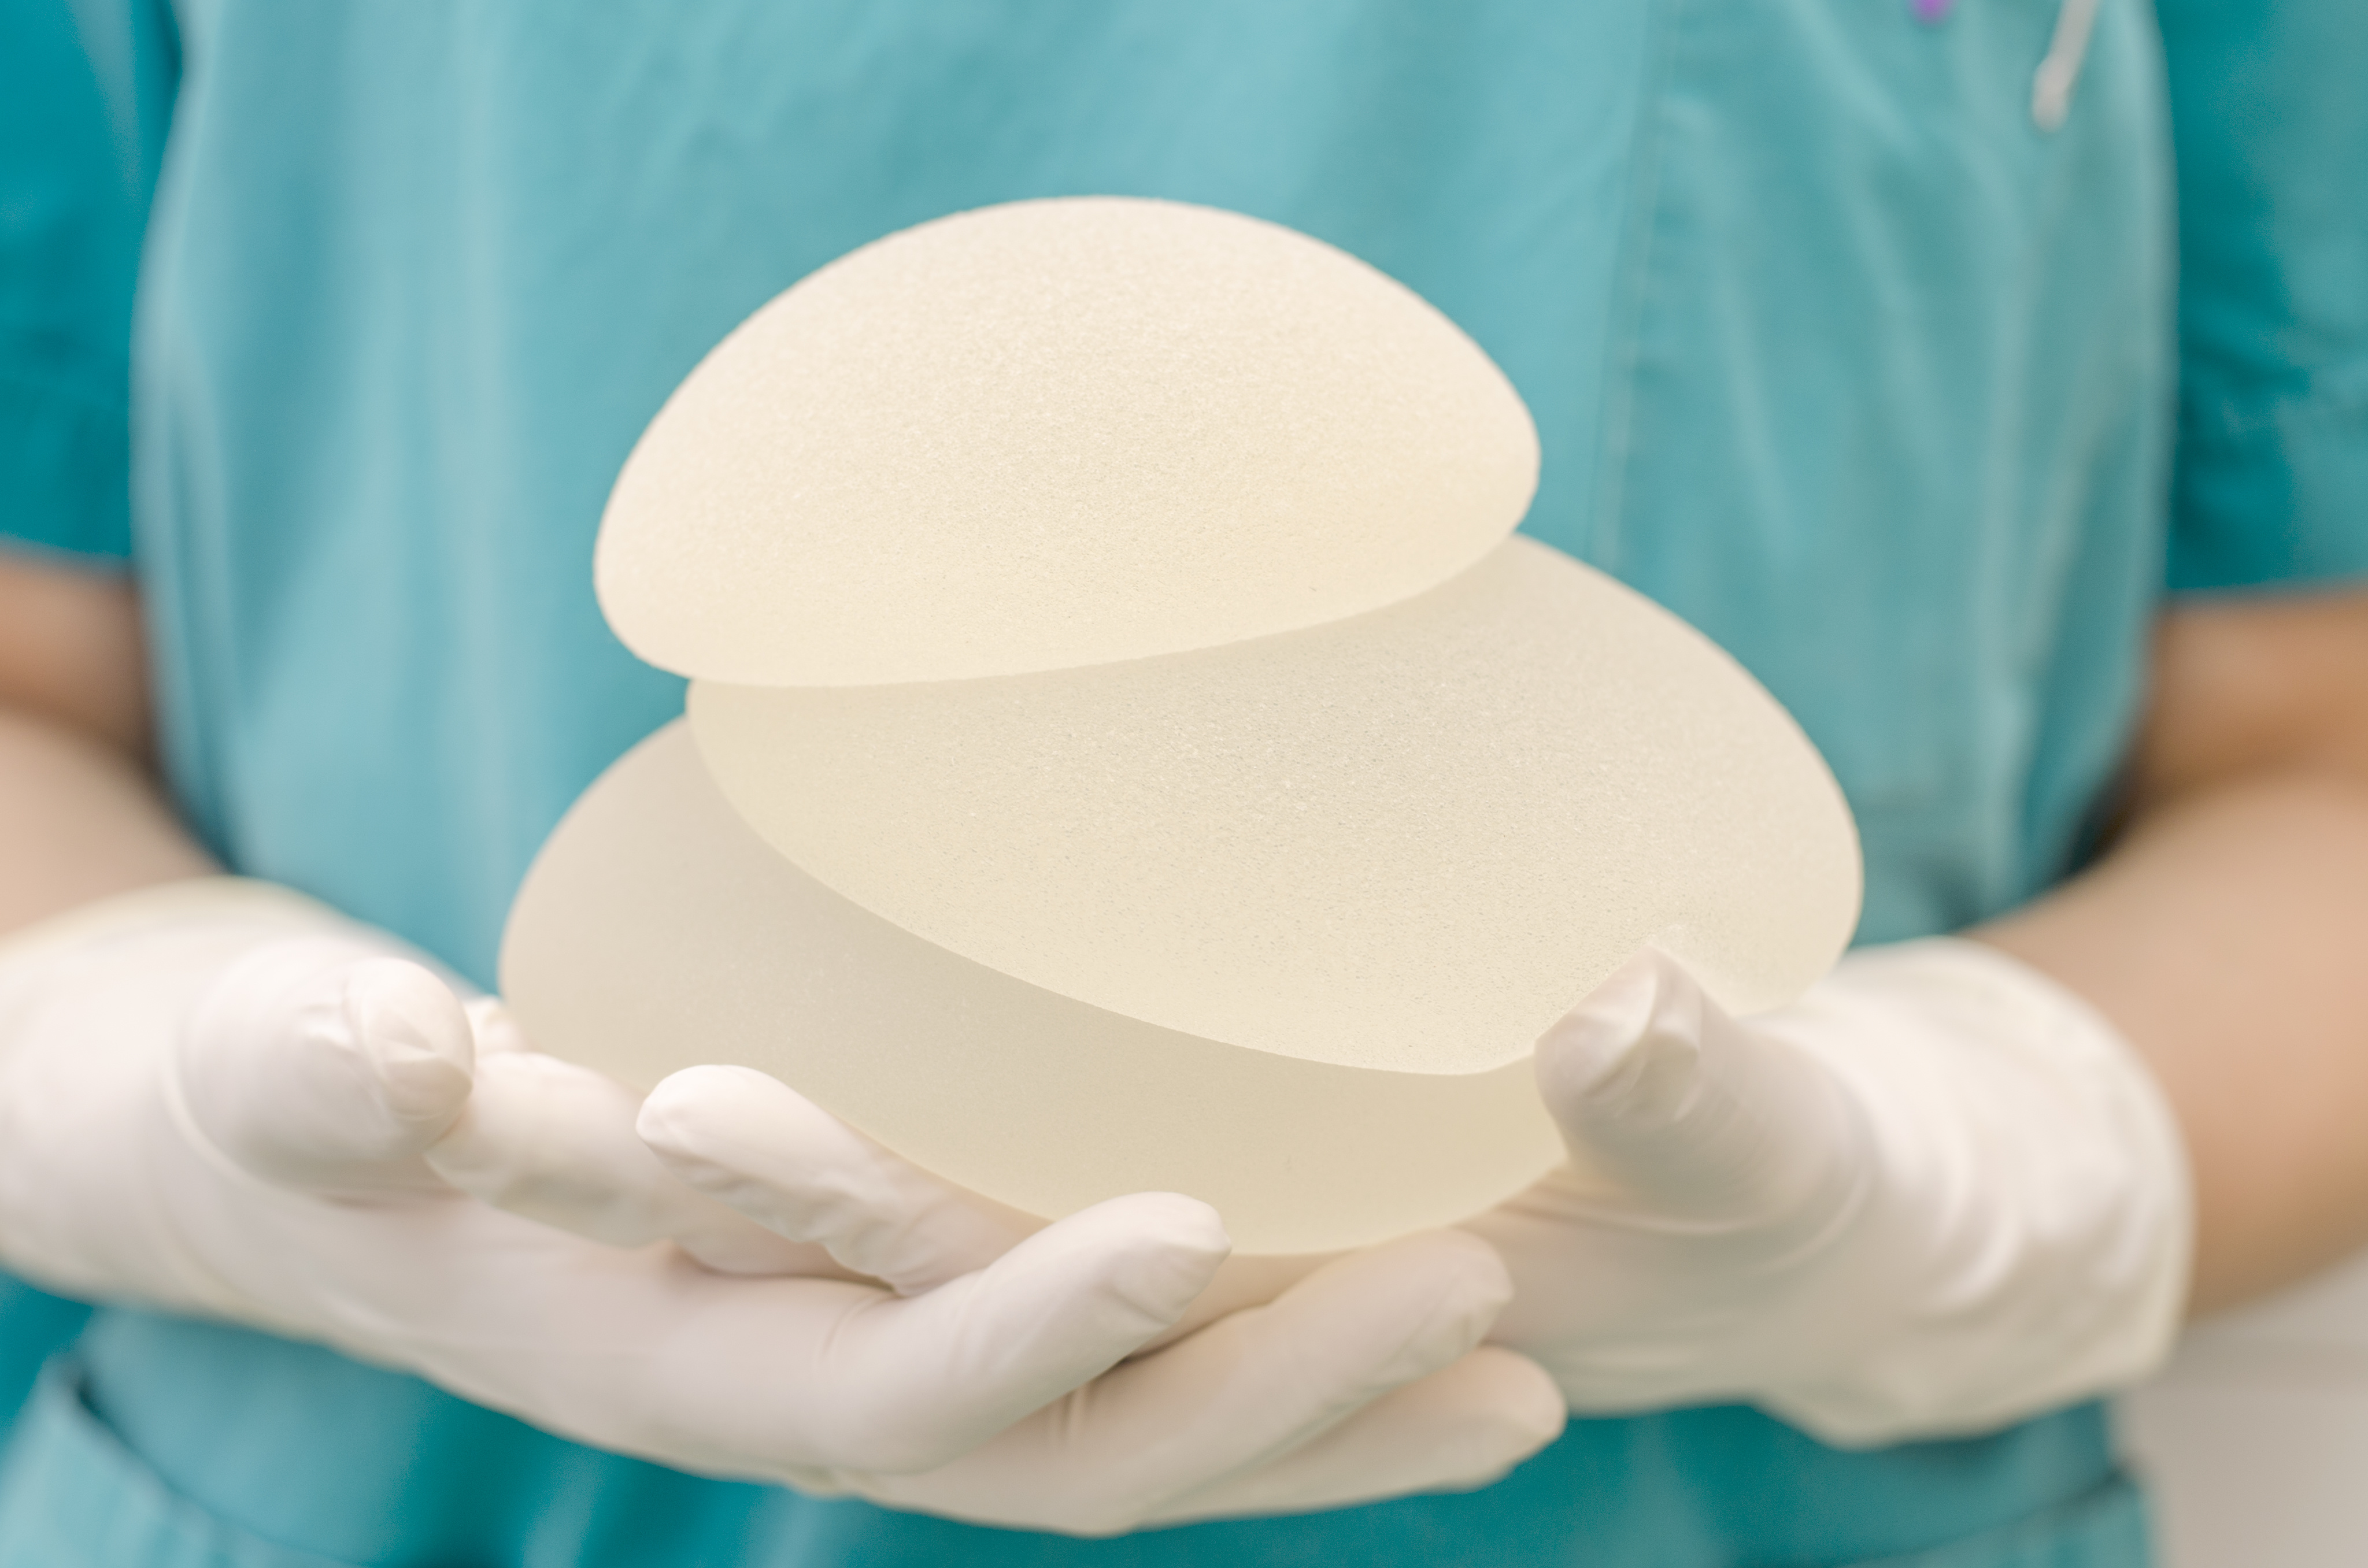 Want To Exchange Your Breast Implant?